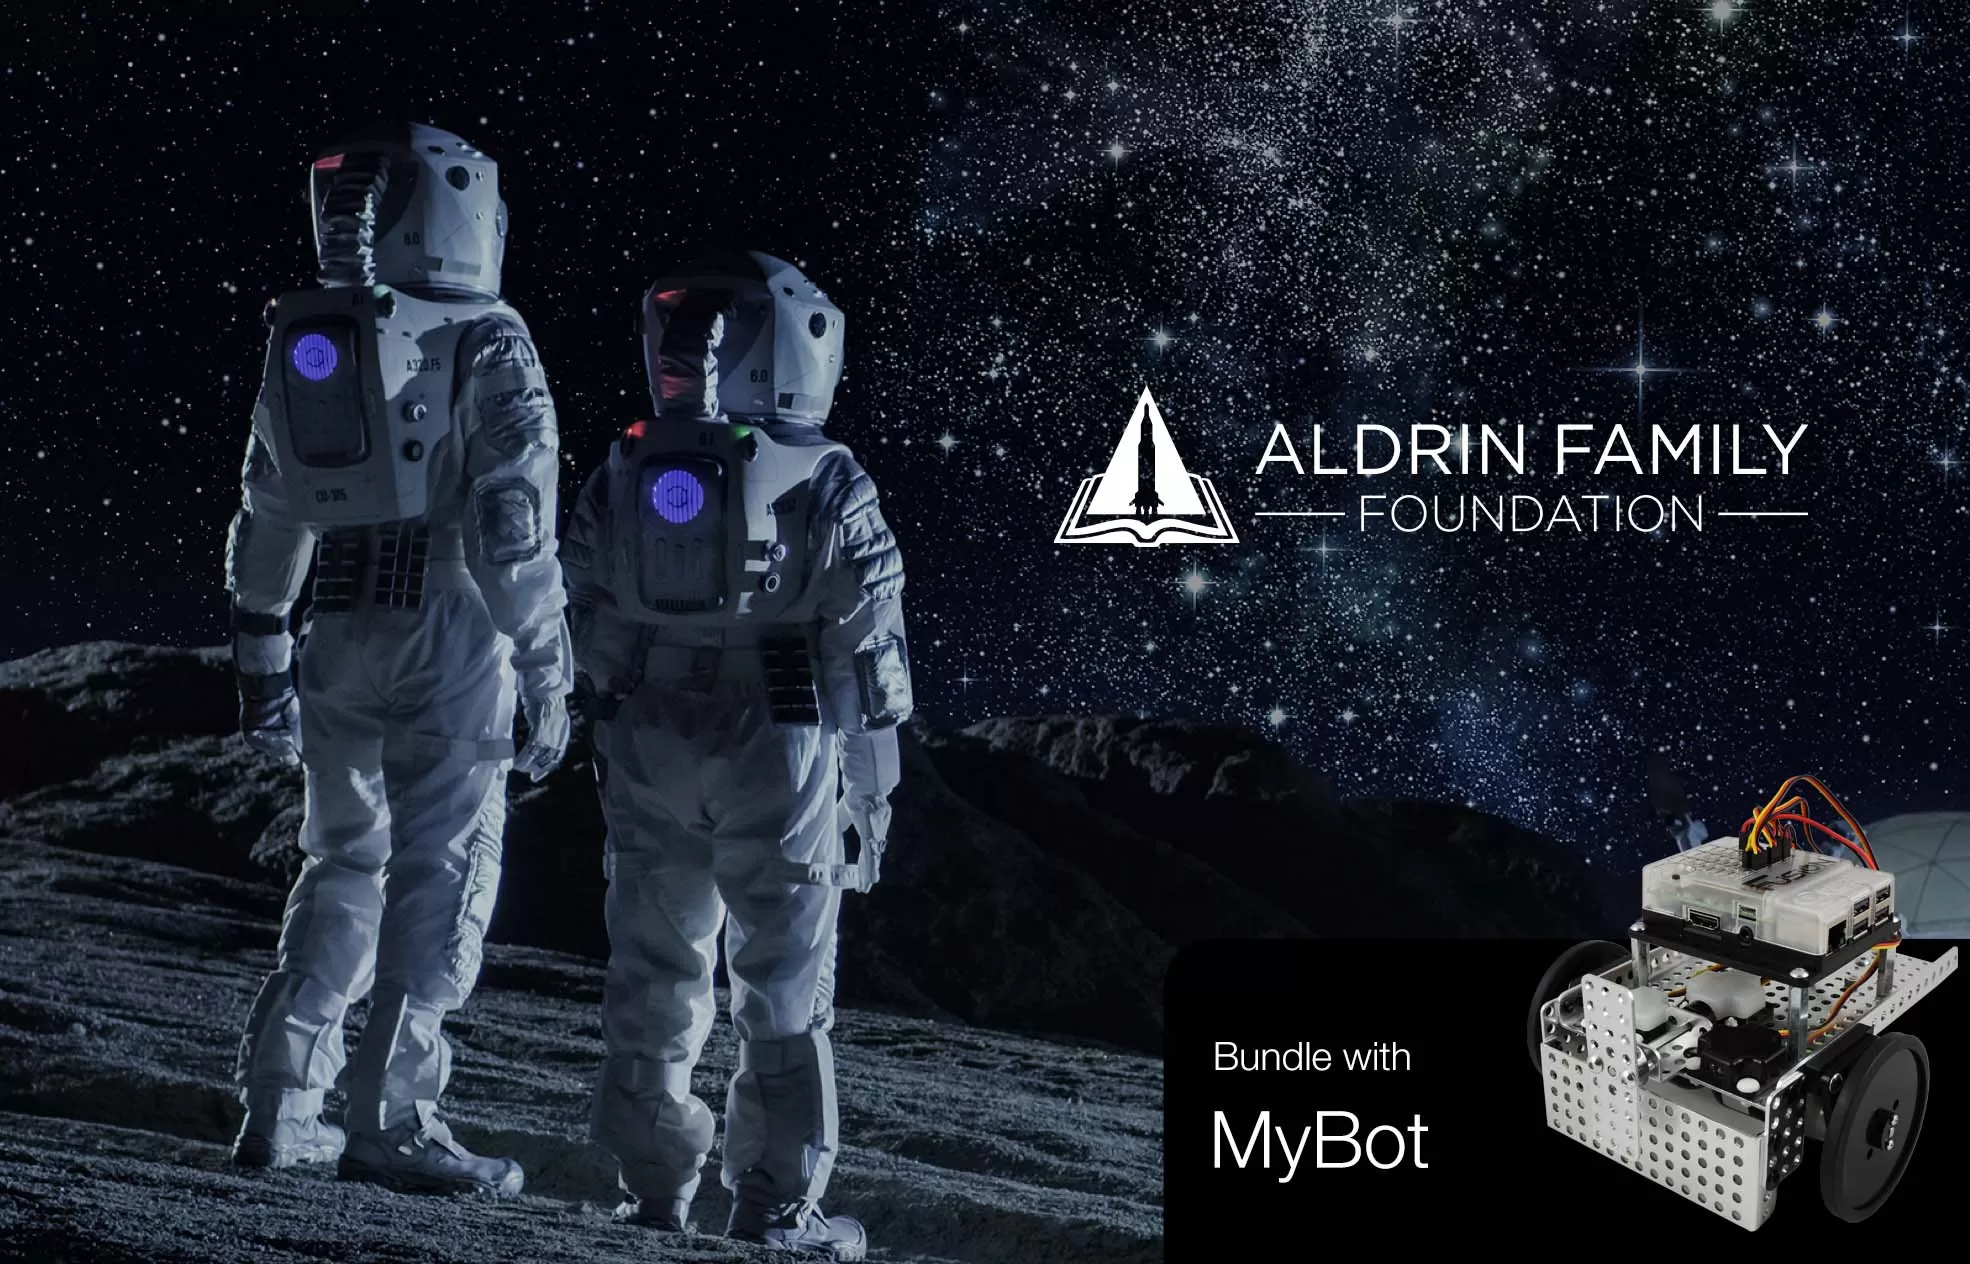 Two astronauts on the moon with 'Aldrin family foundation' and 'bundle with MyBot' to the right-hand side